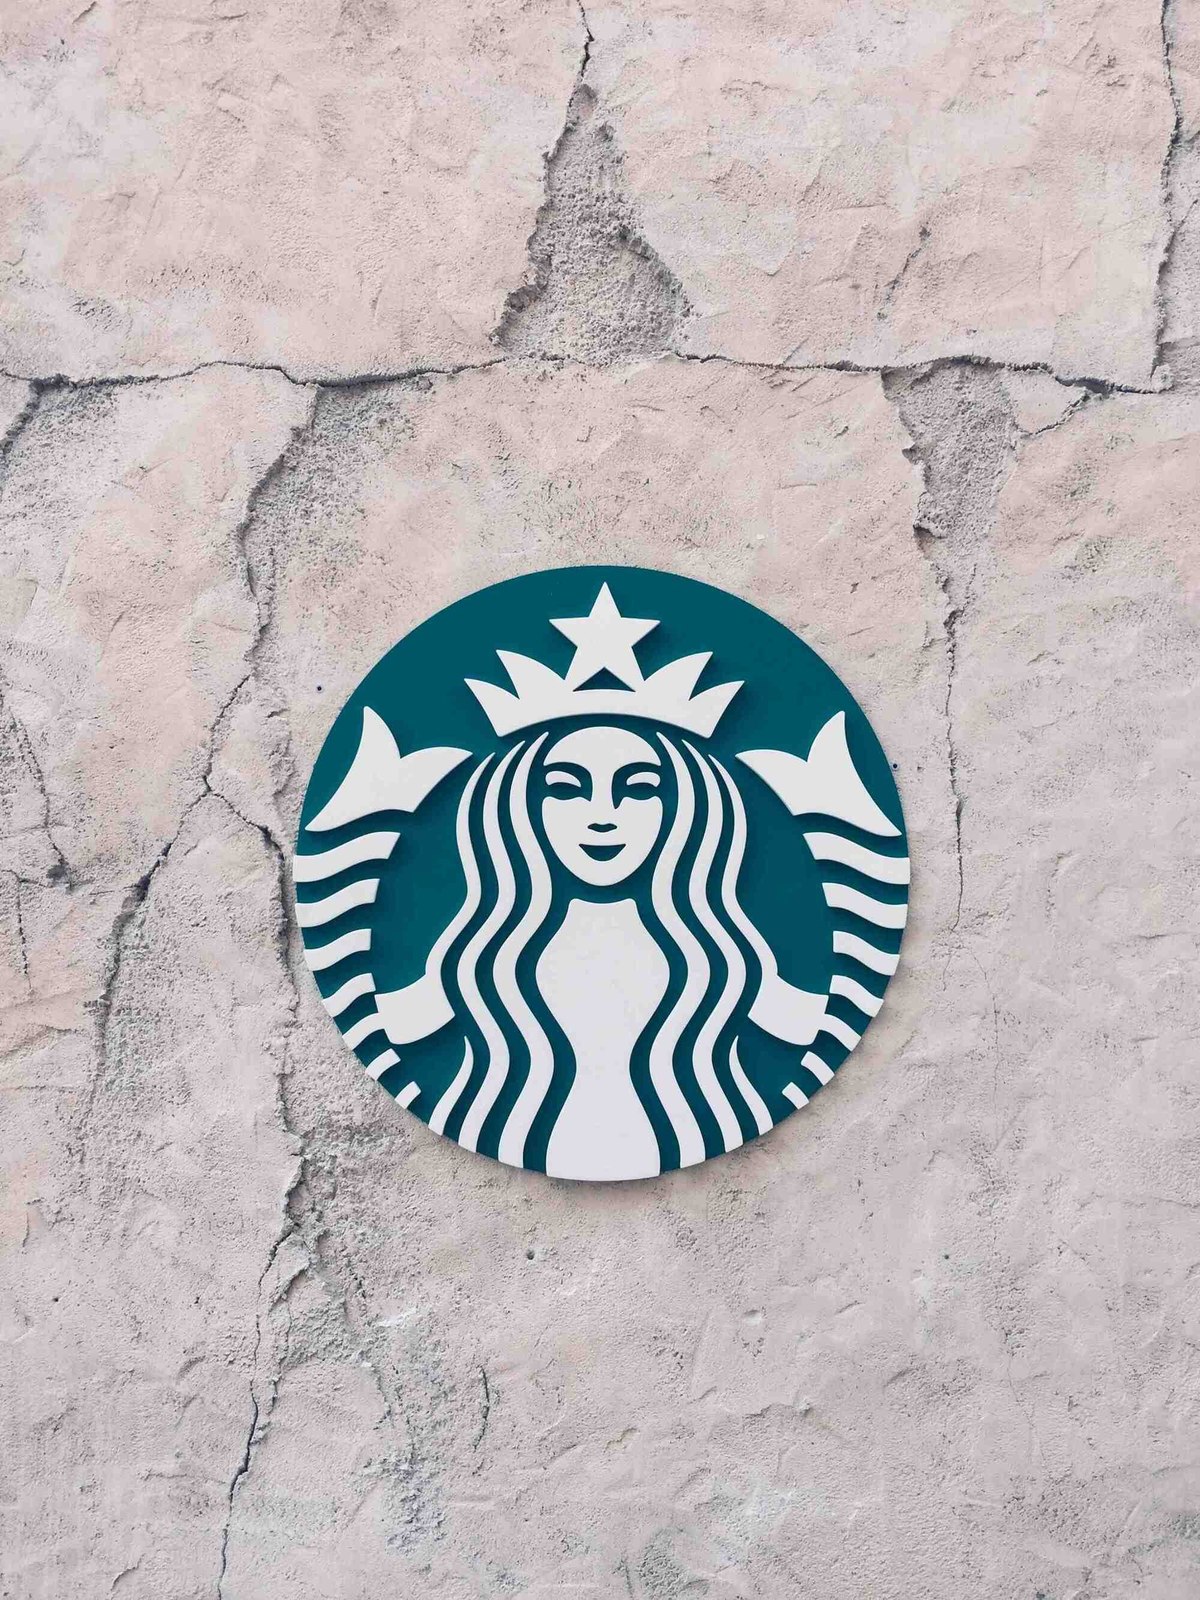 US: Starbucks introduces NFT loyalty program – But is there an appetite for NFTs among regulars?